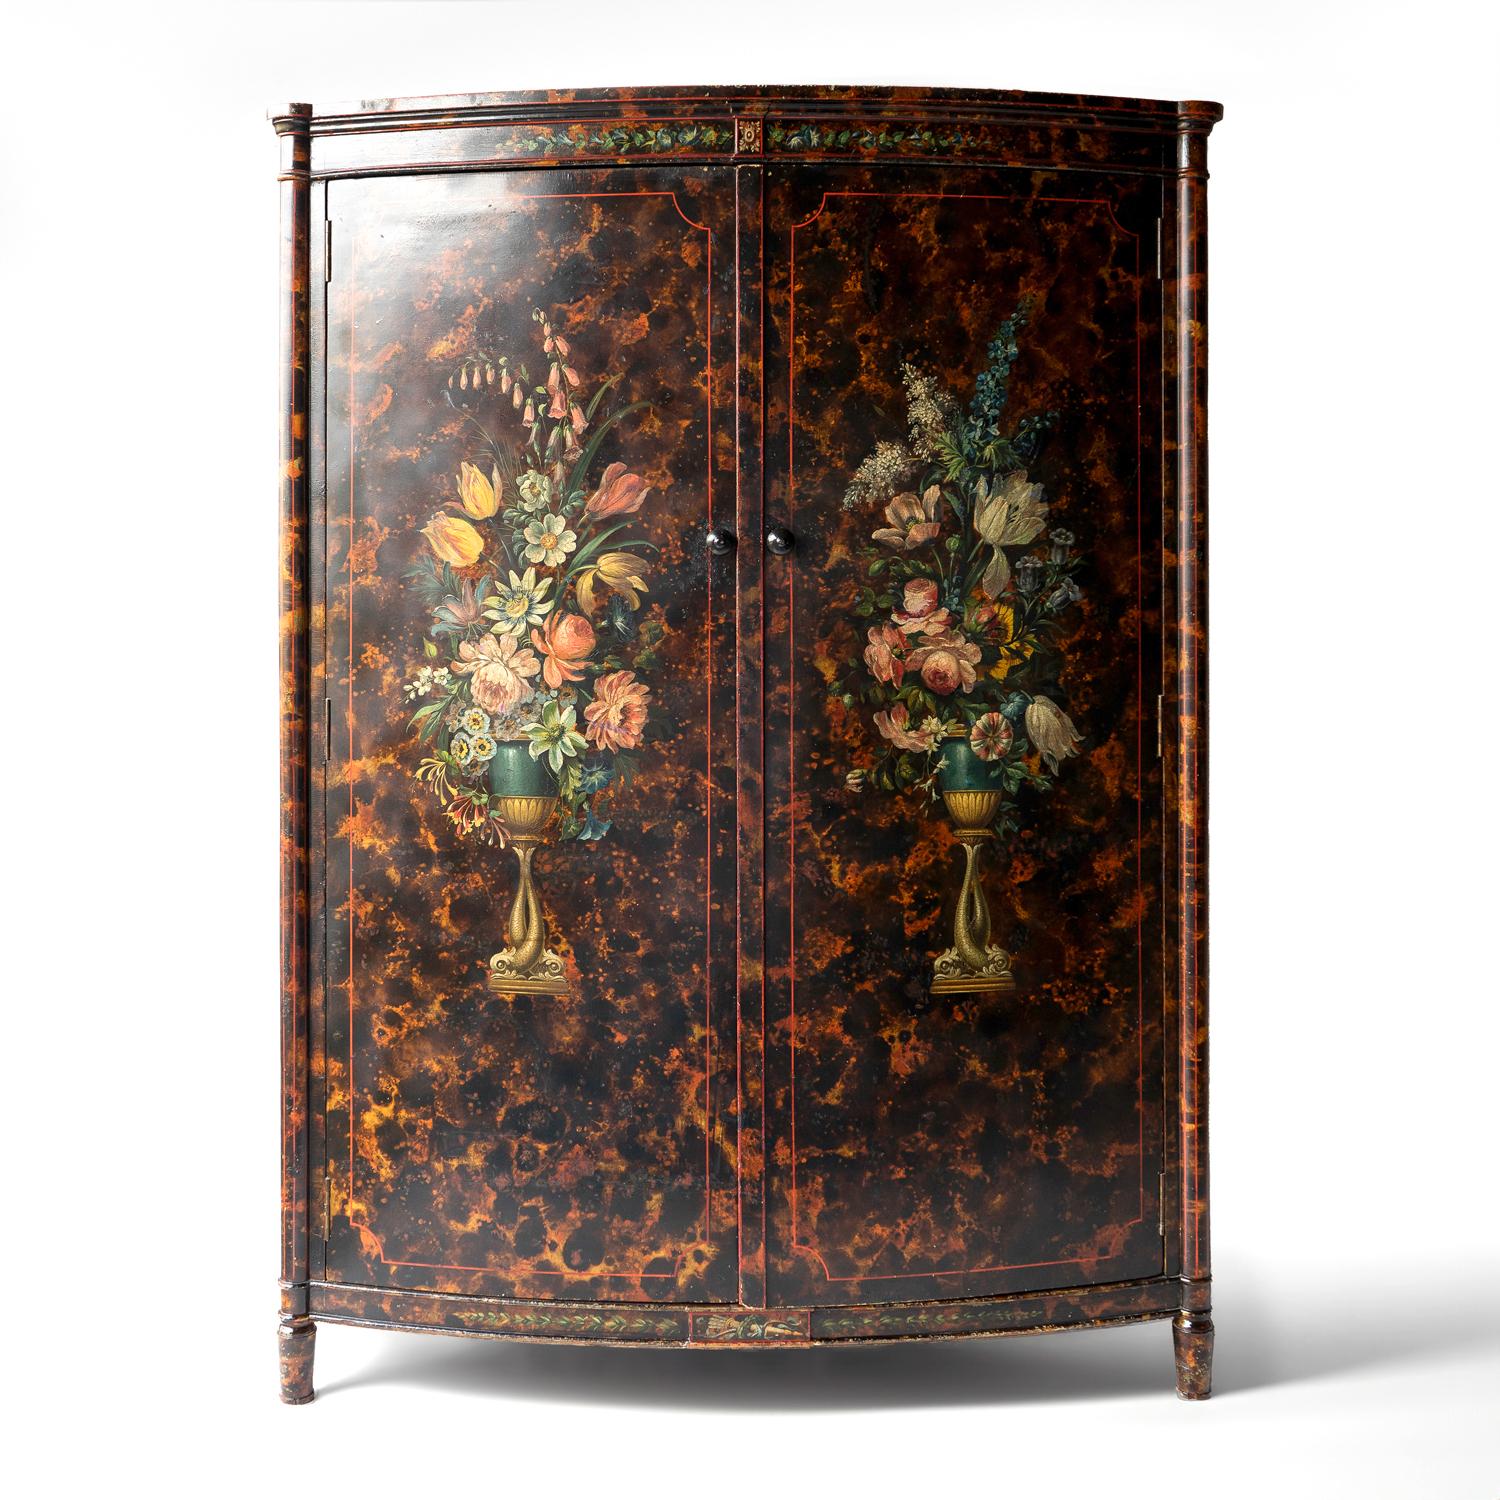 ANTIQUE ITALIAN PAINTED WARDROBE/ARMOIRE/CLOSET 
A heavy, well-made wooden bow-fronted wardrobe with two doors, a brass hanging rail and an internal full-length mirror.

Probably originating from Venice and dated to the early 20th Century c.